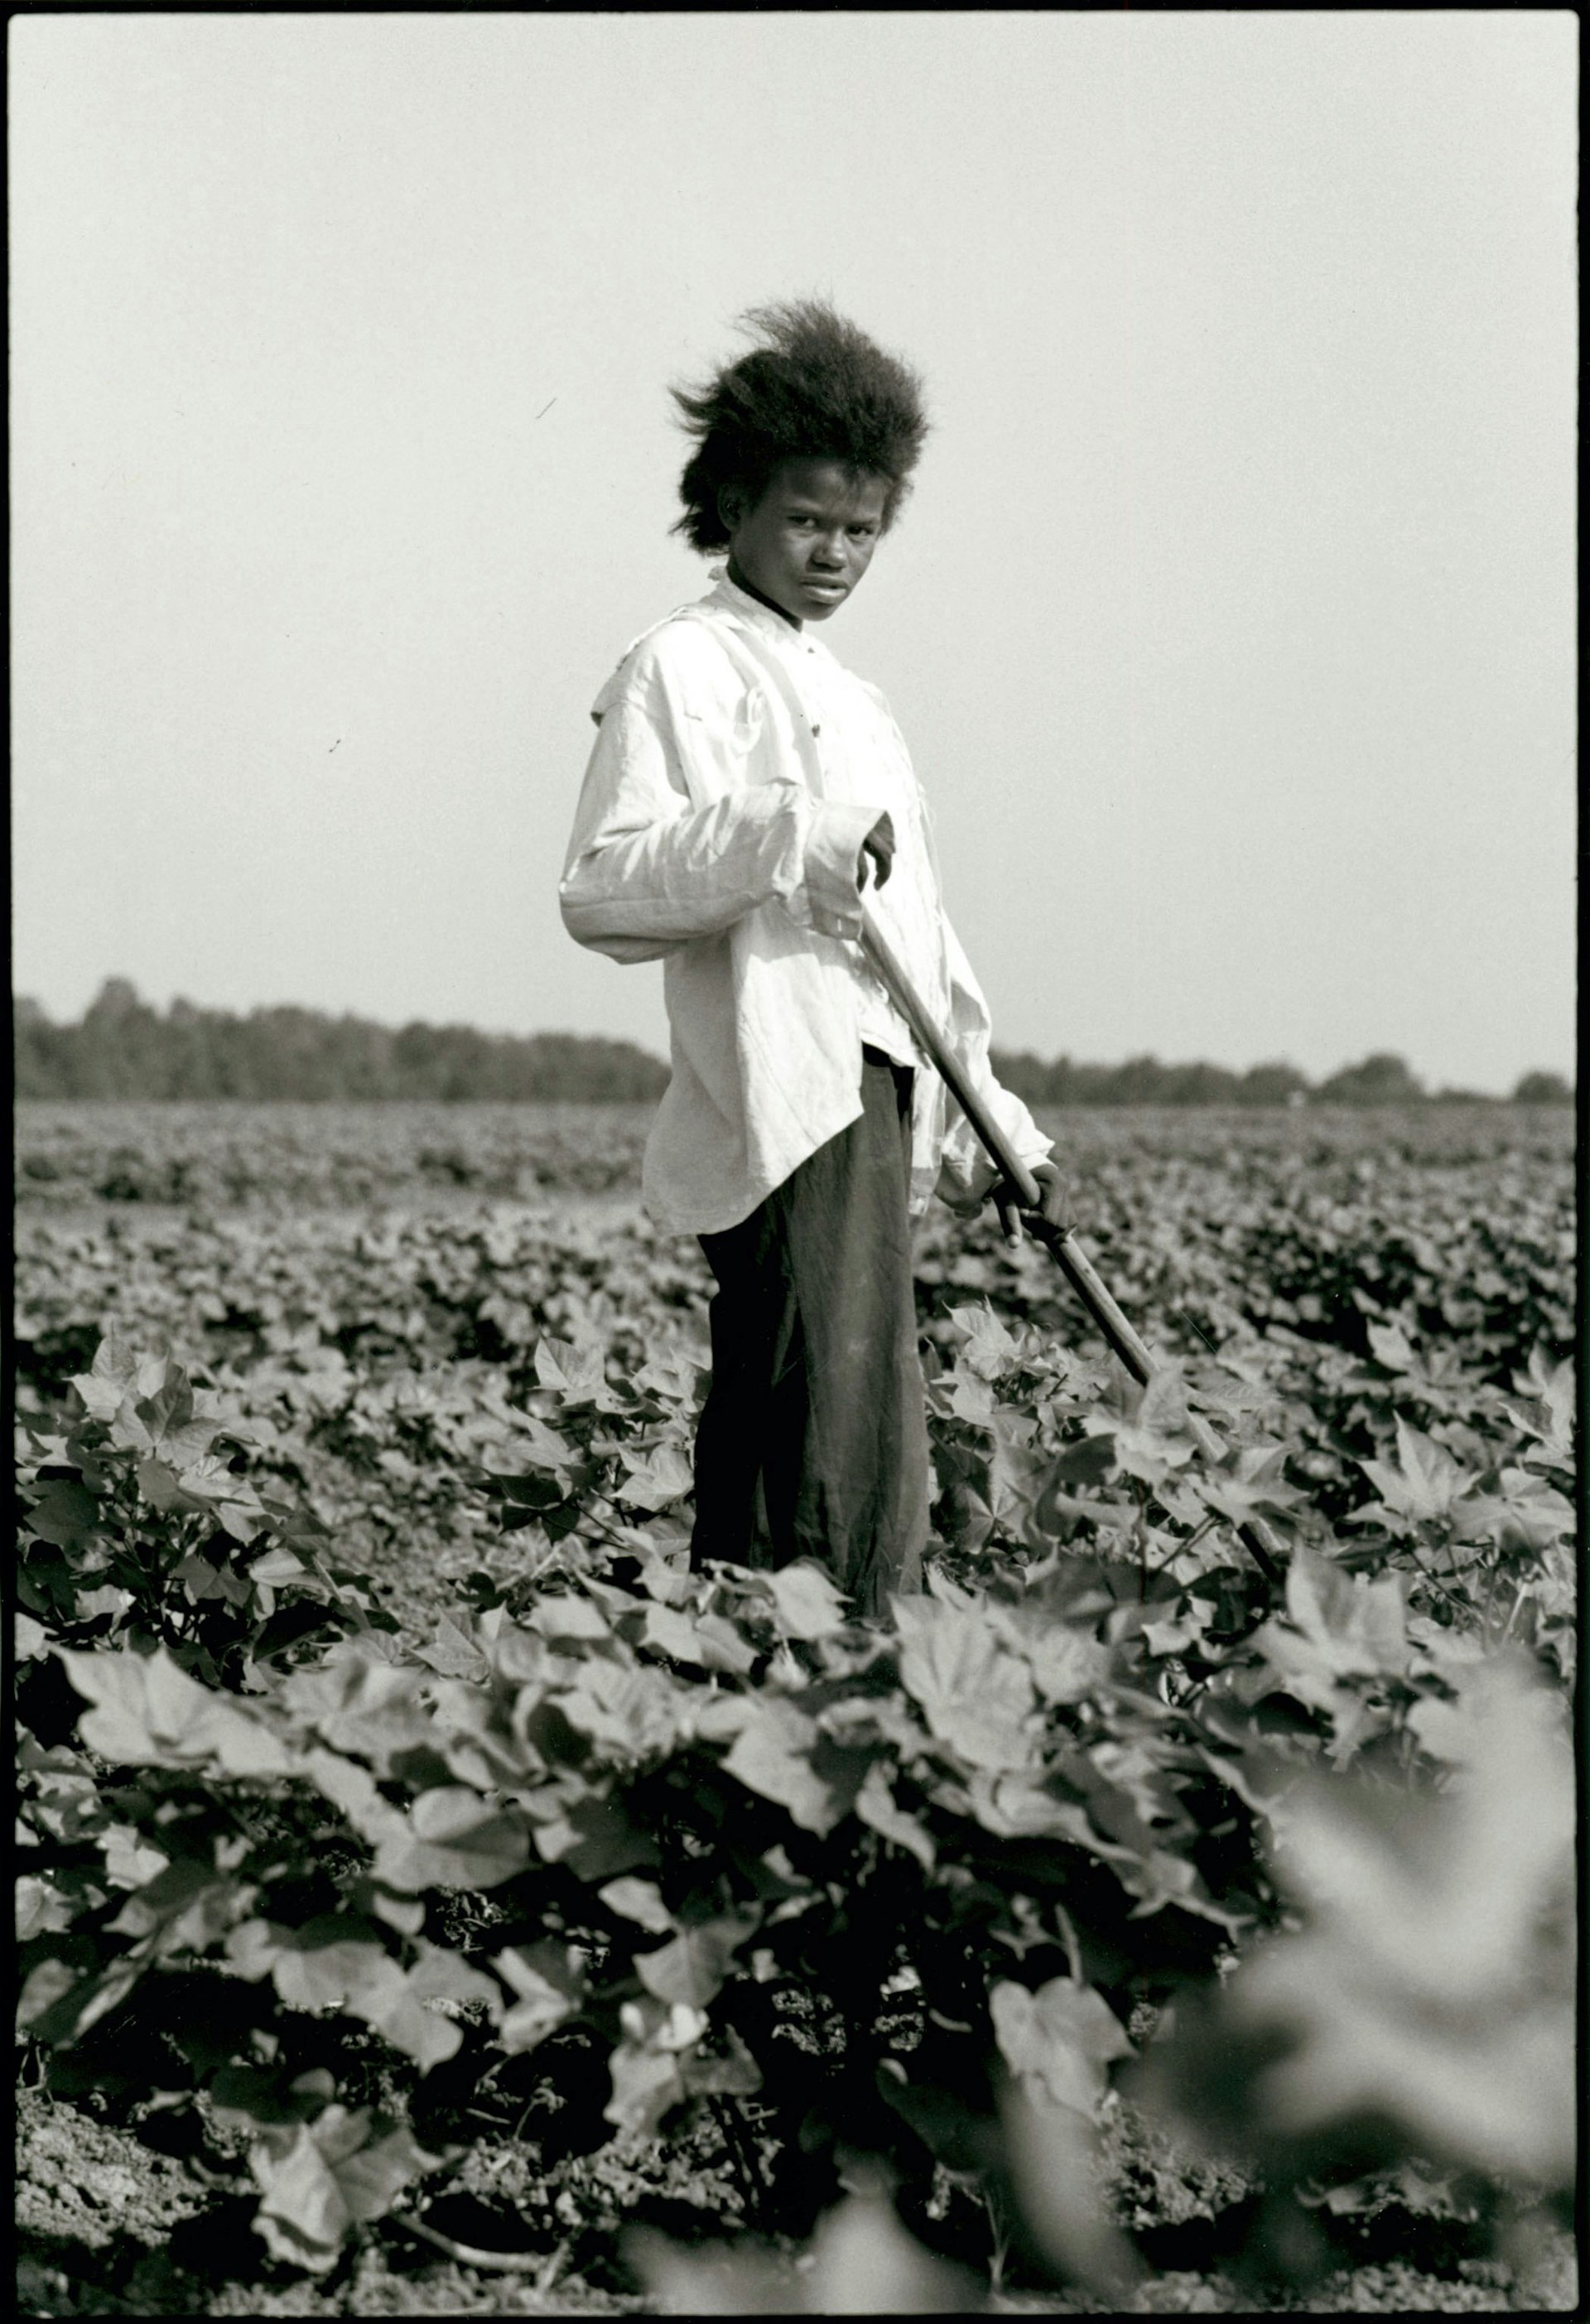 Tallahatchie County, Mississippi, 1963